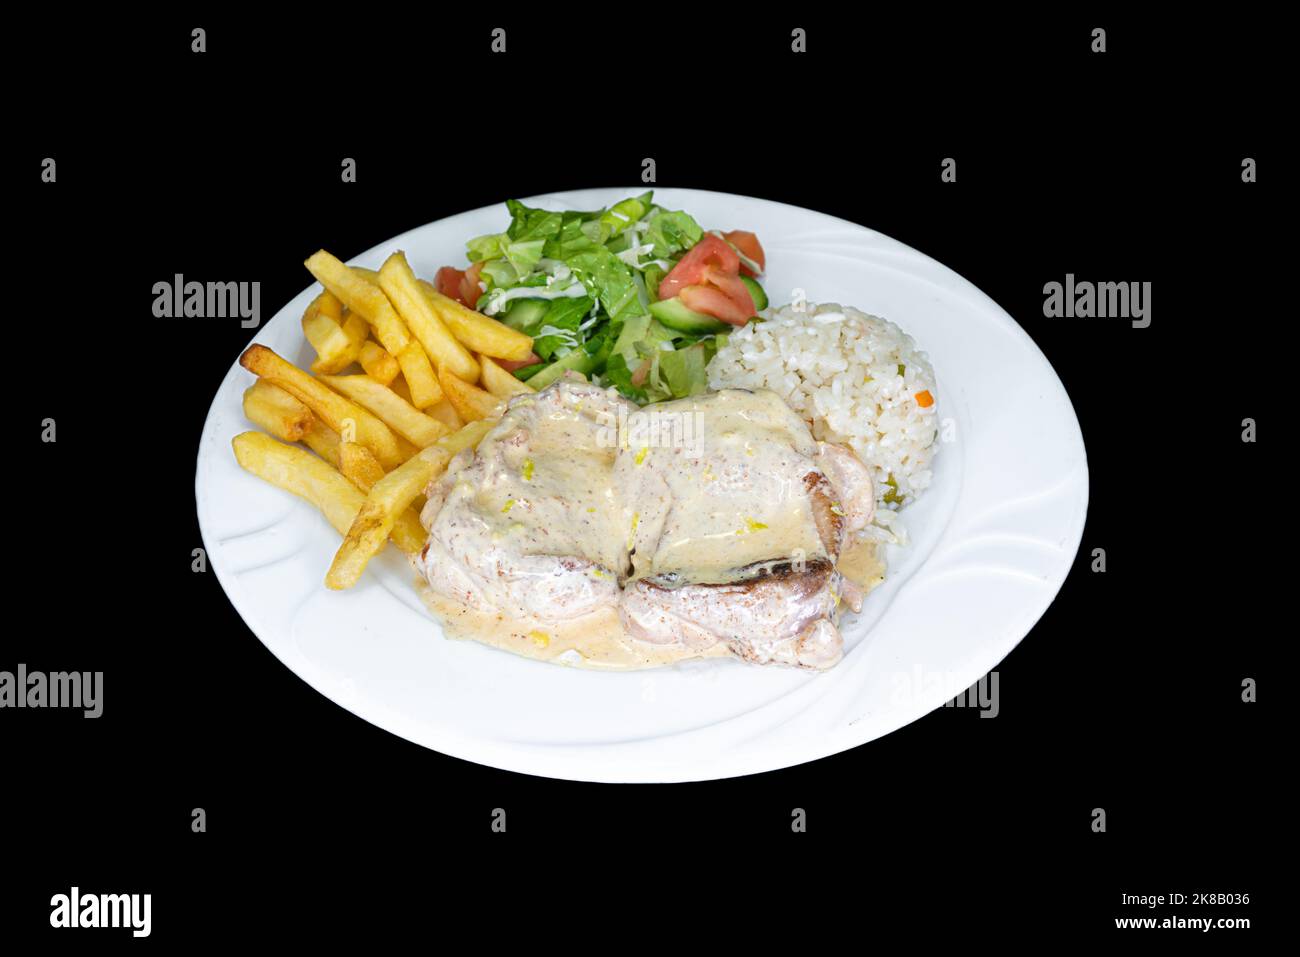 Lemon chicken with rice, salad and french fries in a white plate on a black background Stock Photo